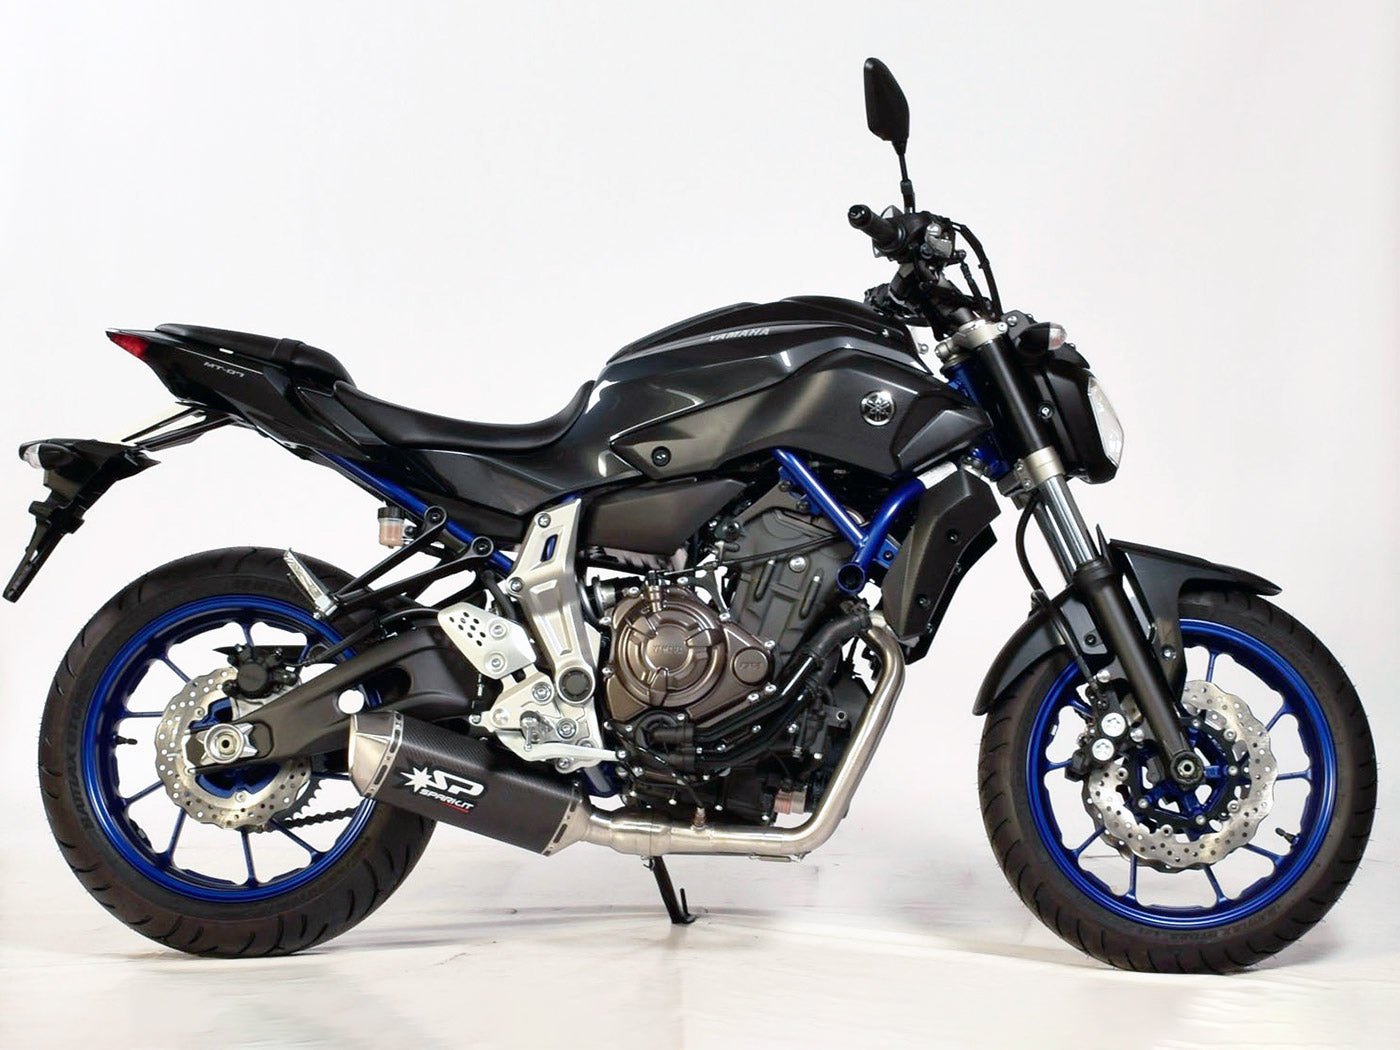 SPARK GYA8820 Yamaha MT-07/Tracer 700 Full Exhaust System "Force" (EU homologated; low position)